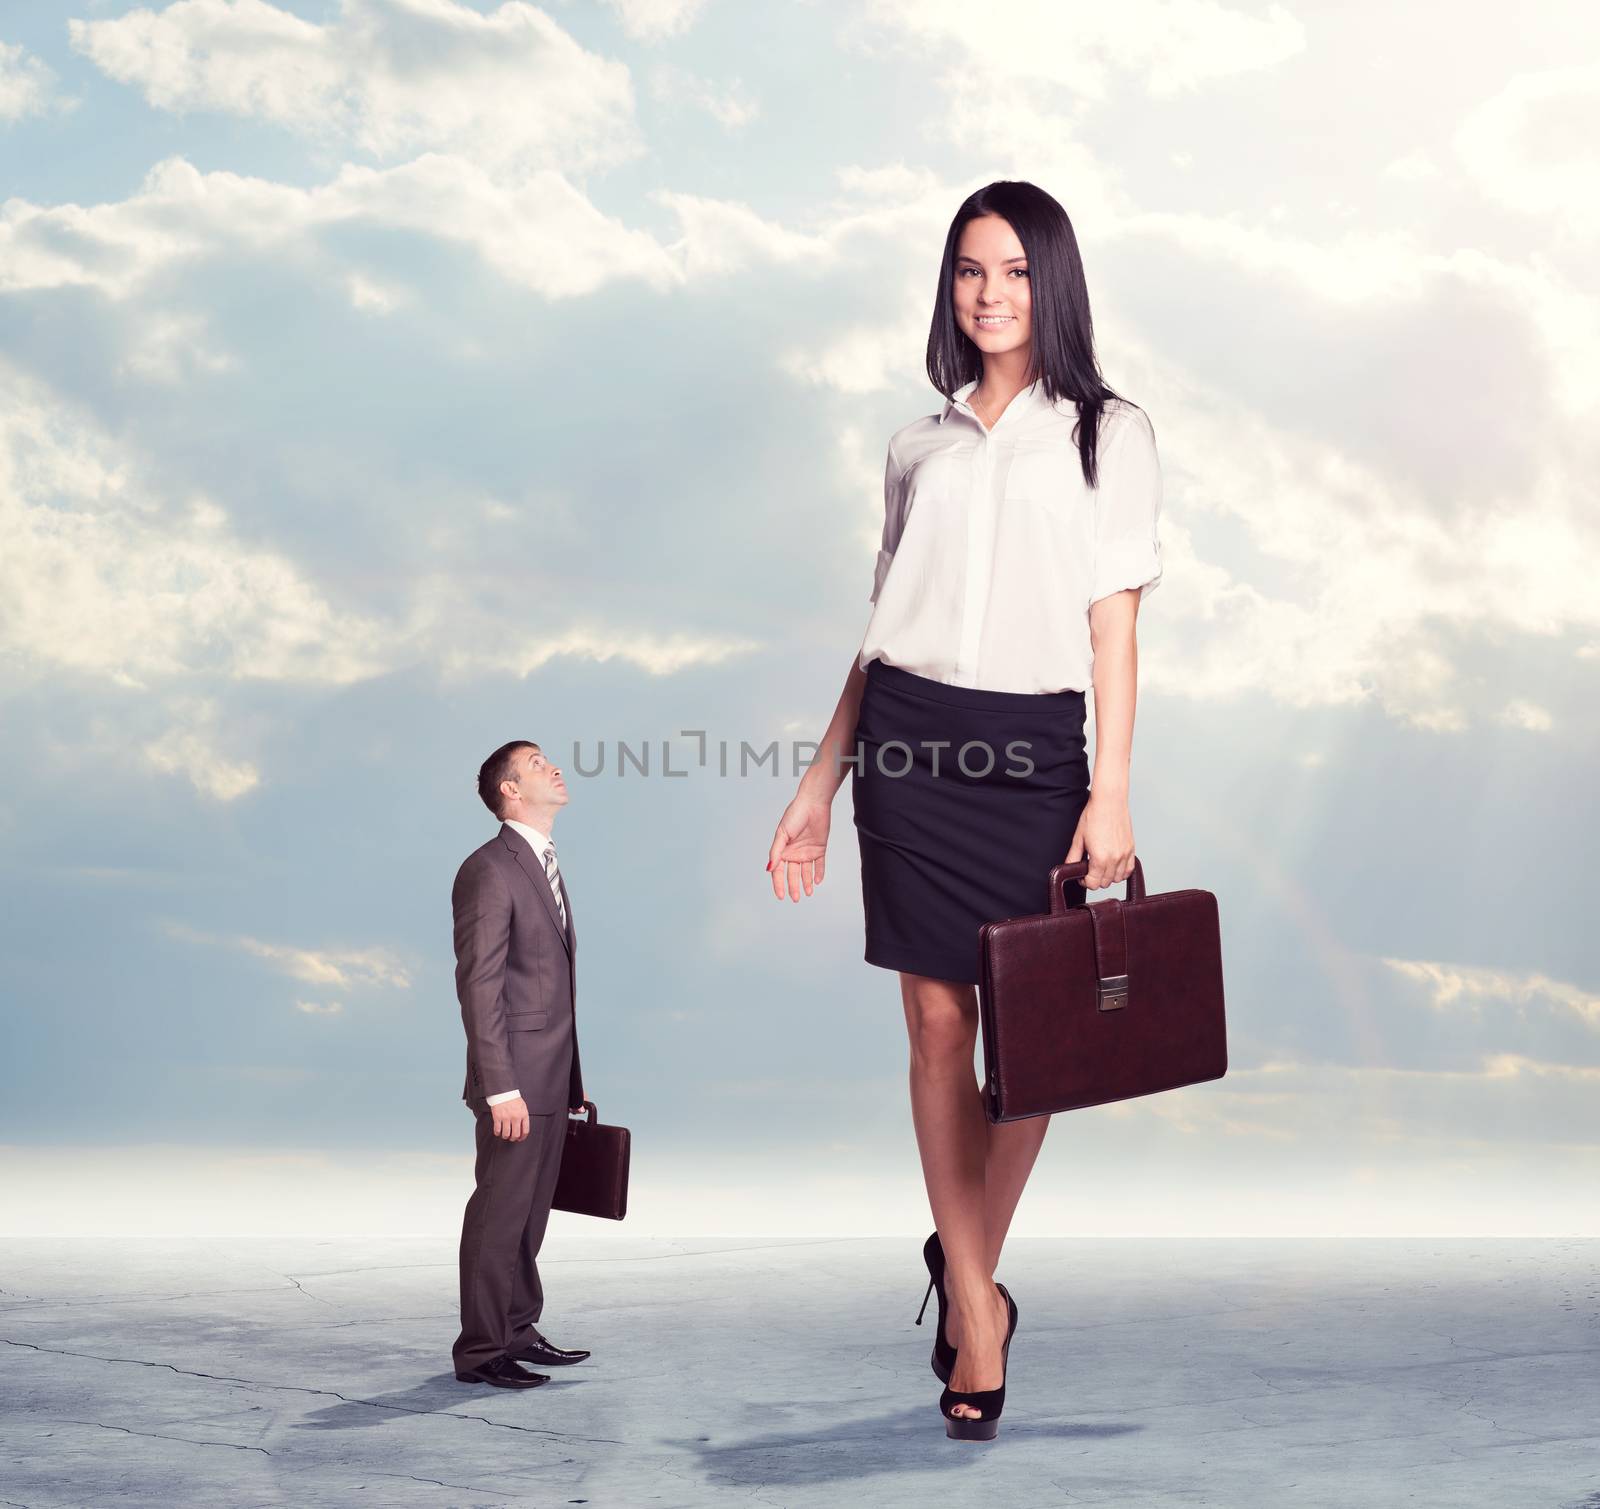 Small businessman looking up at on high walking businesswoman. Clouds and cement surface as background. Business concept